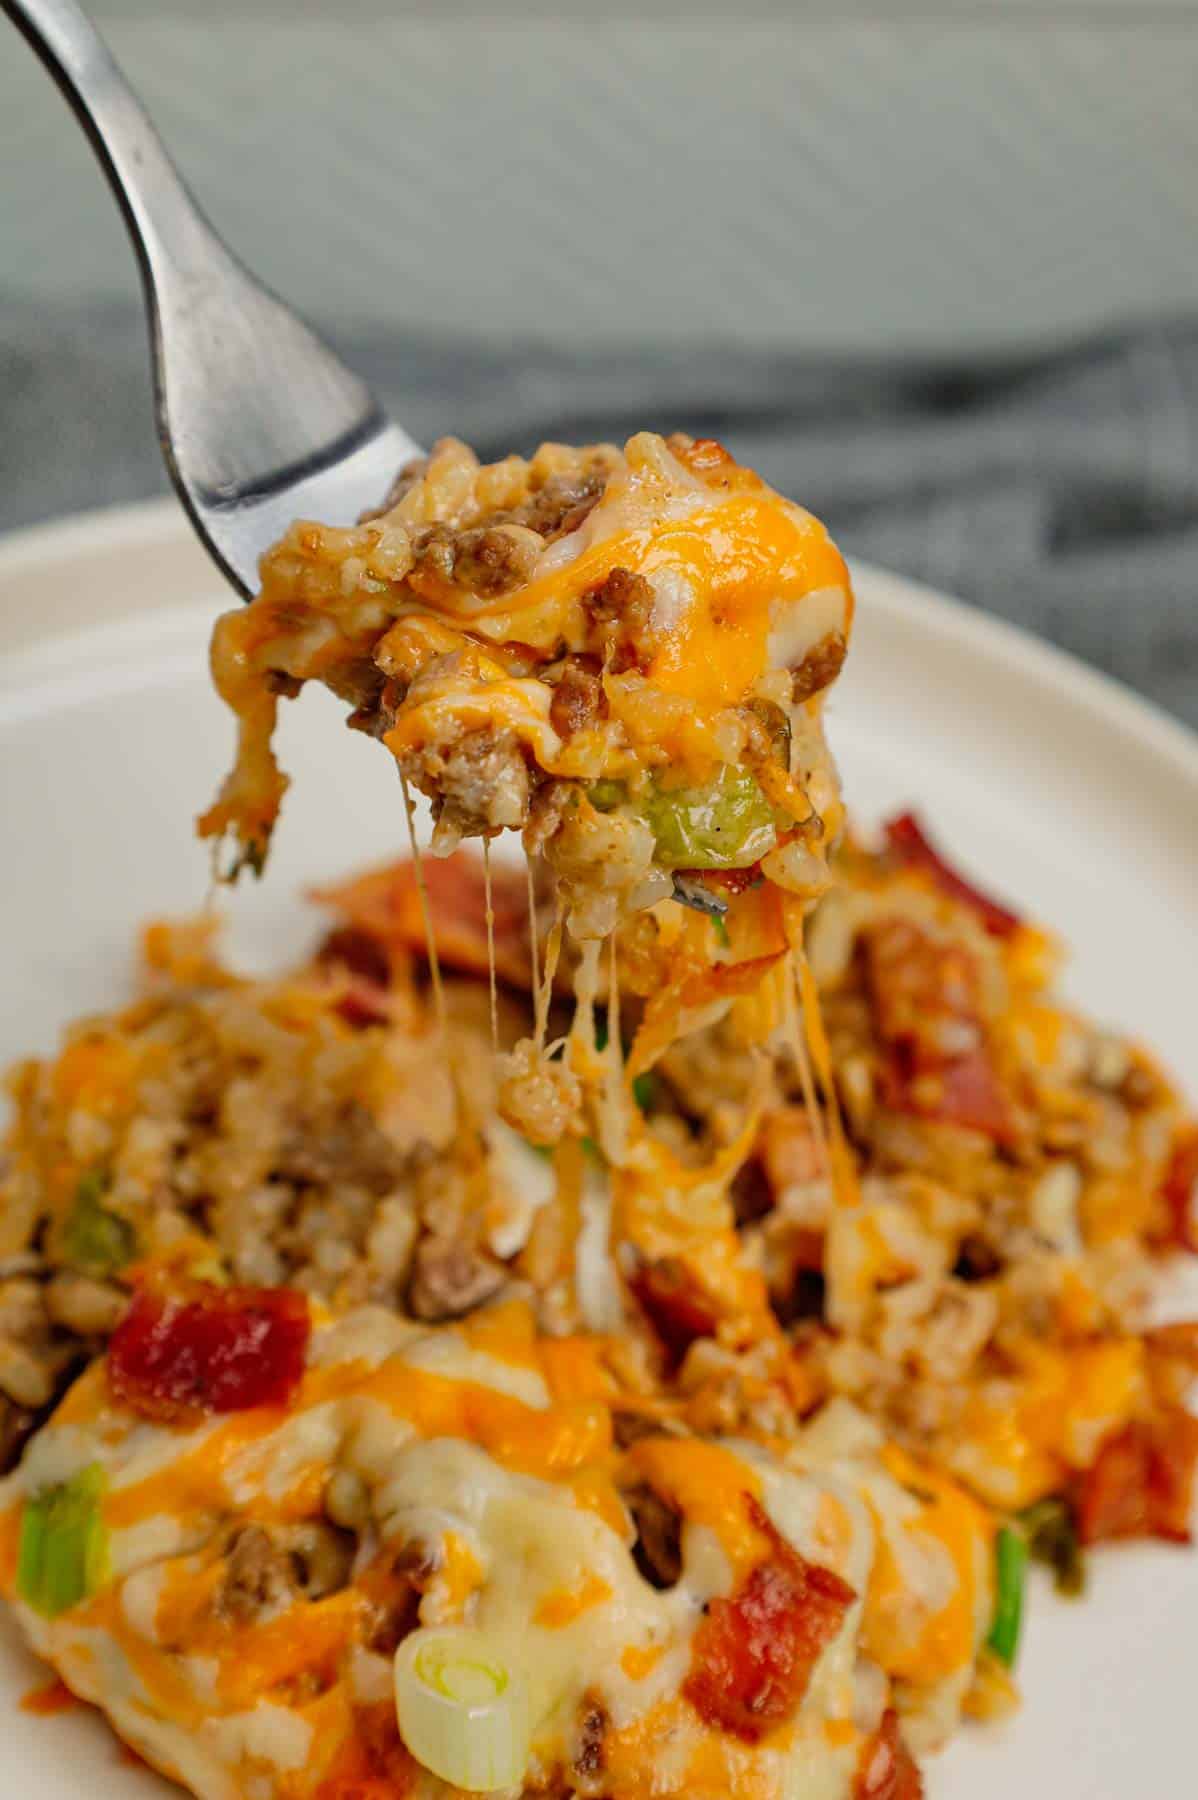 Cheesy Ranch Ground Beef and Rice Casserole is a hearty dinner recipe loaded with ground beef, instant rice, bacon, cheddar soup, milk, ranch dressing mix, chopped green onions and shredded cheese.